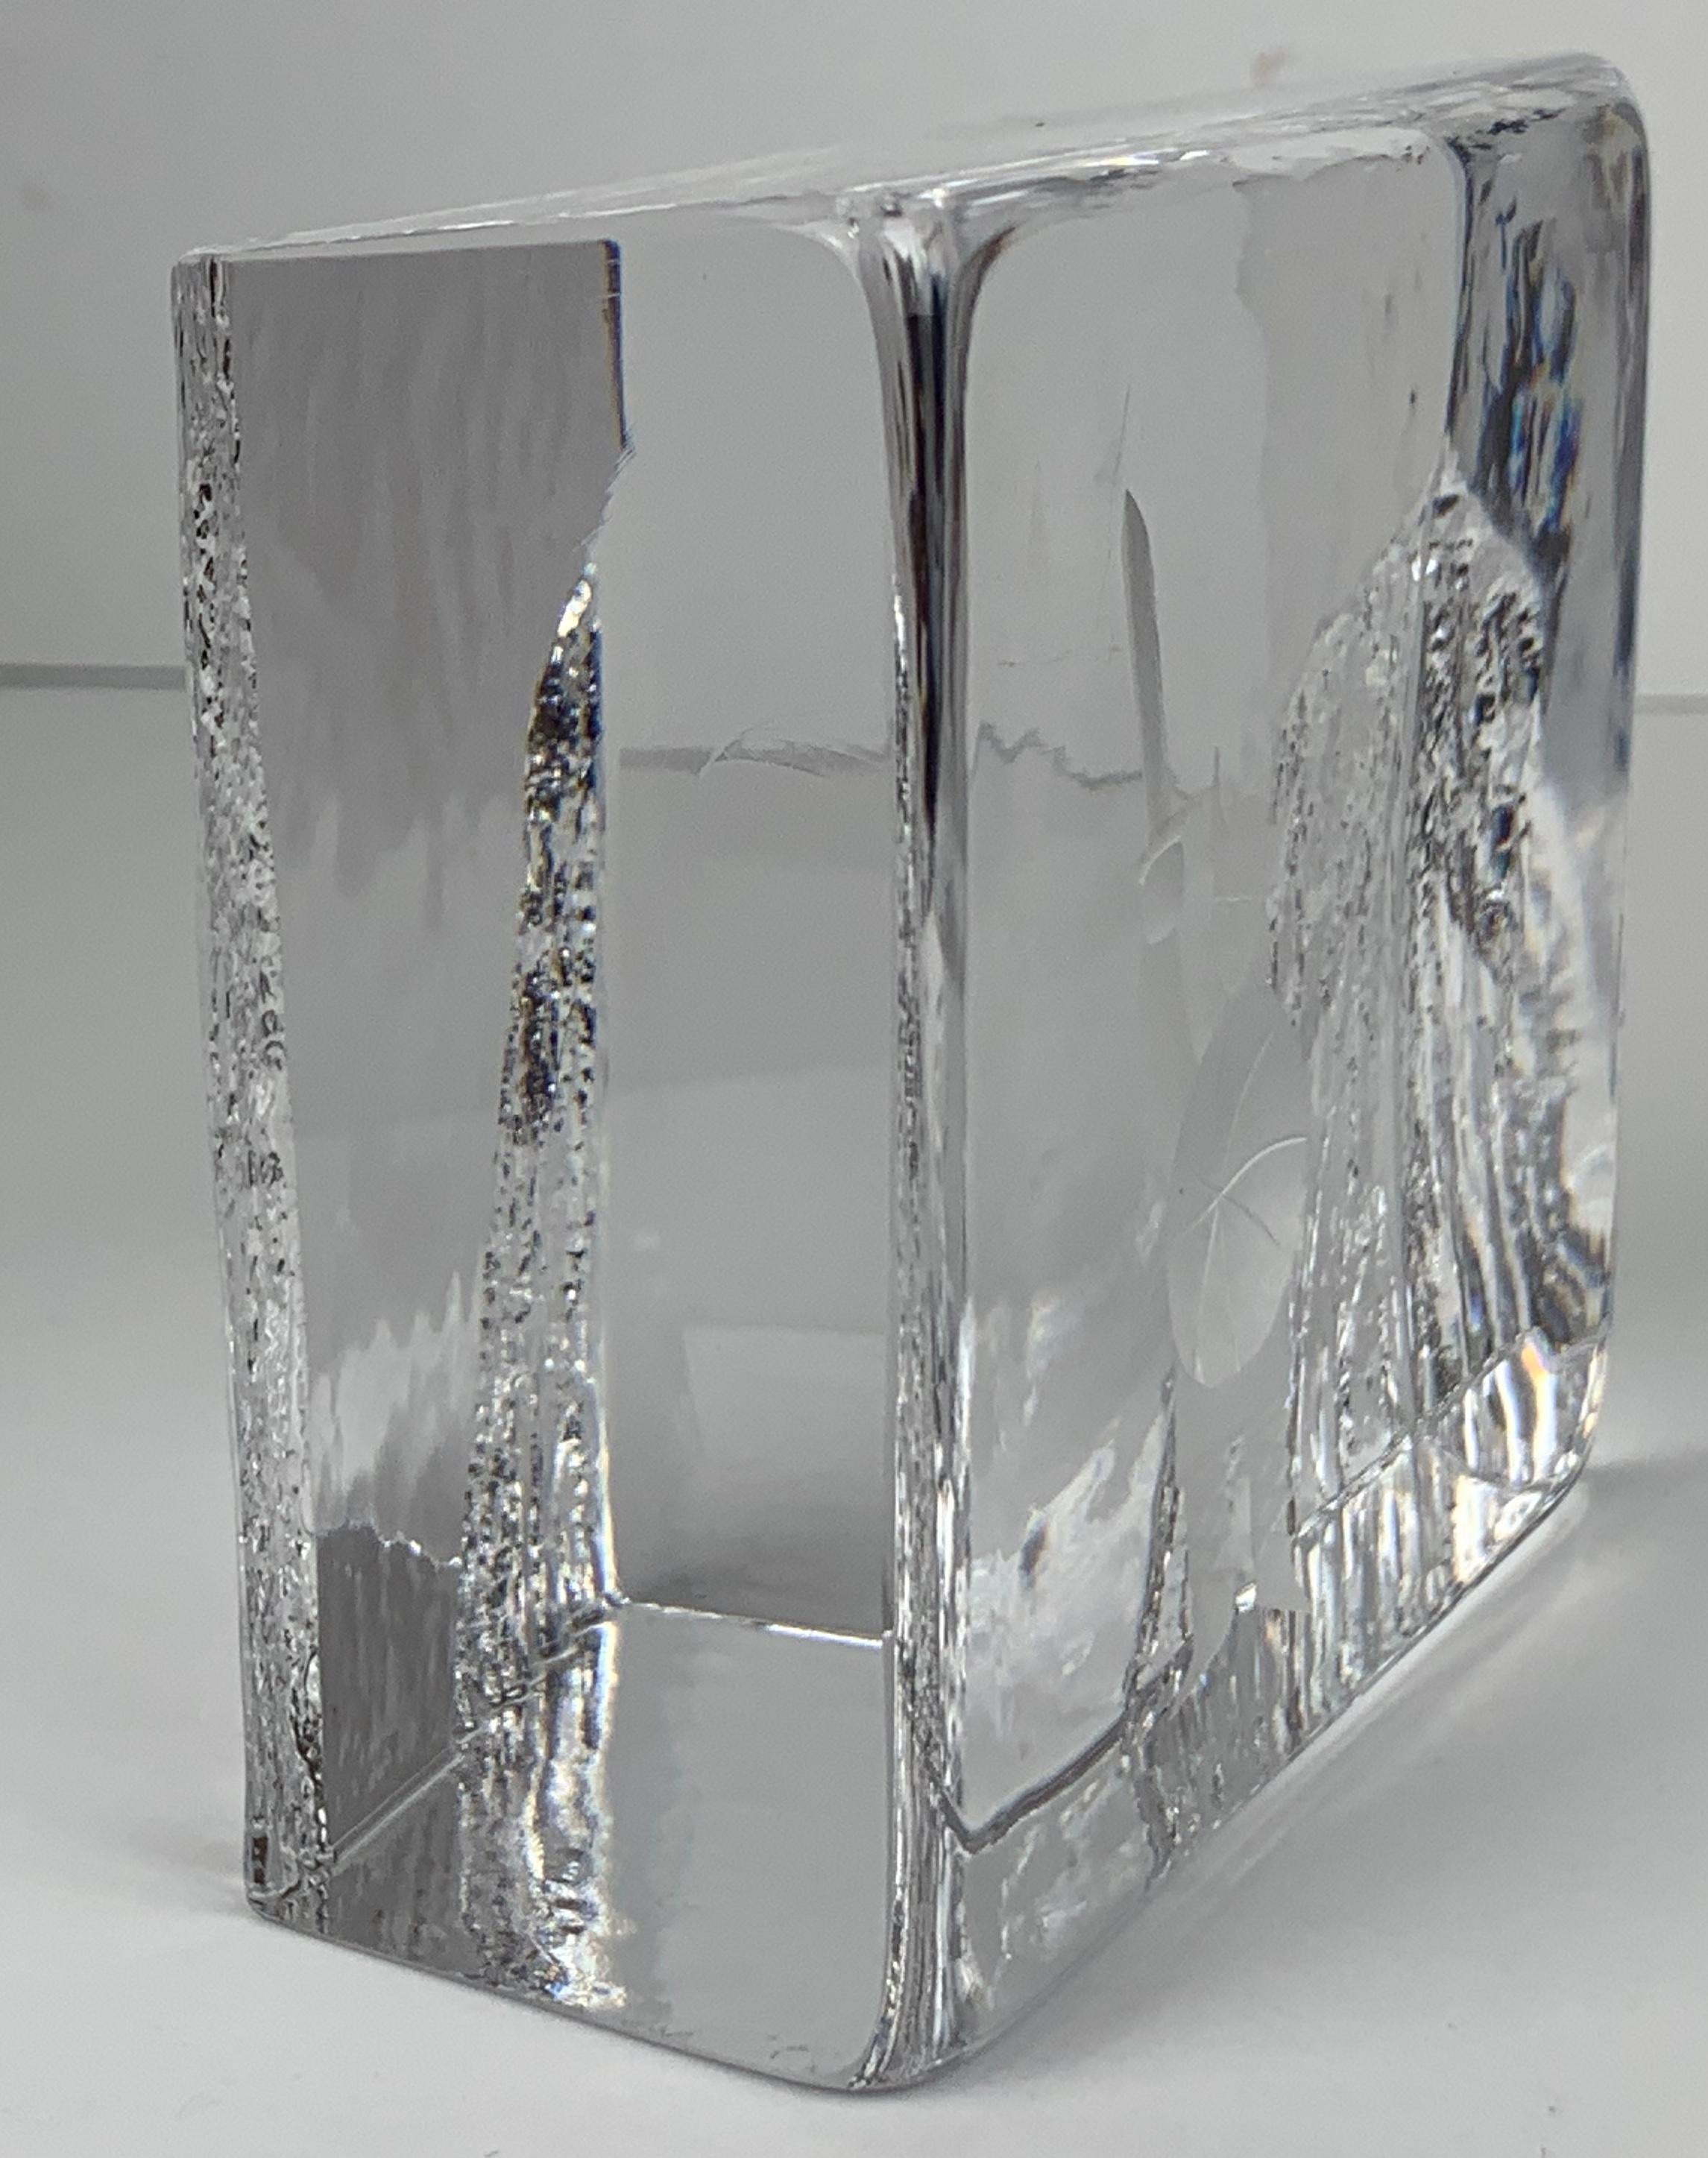 A great example of Scandinavian design from the 1970s. This paperweight would look great on any desk, but also very decorative on a shelf or occasional table.  Bengt Edenfalk worked for Skruf glass in Sweden from 1953-1978. This clear crystal